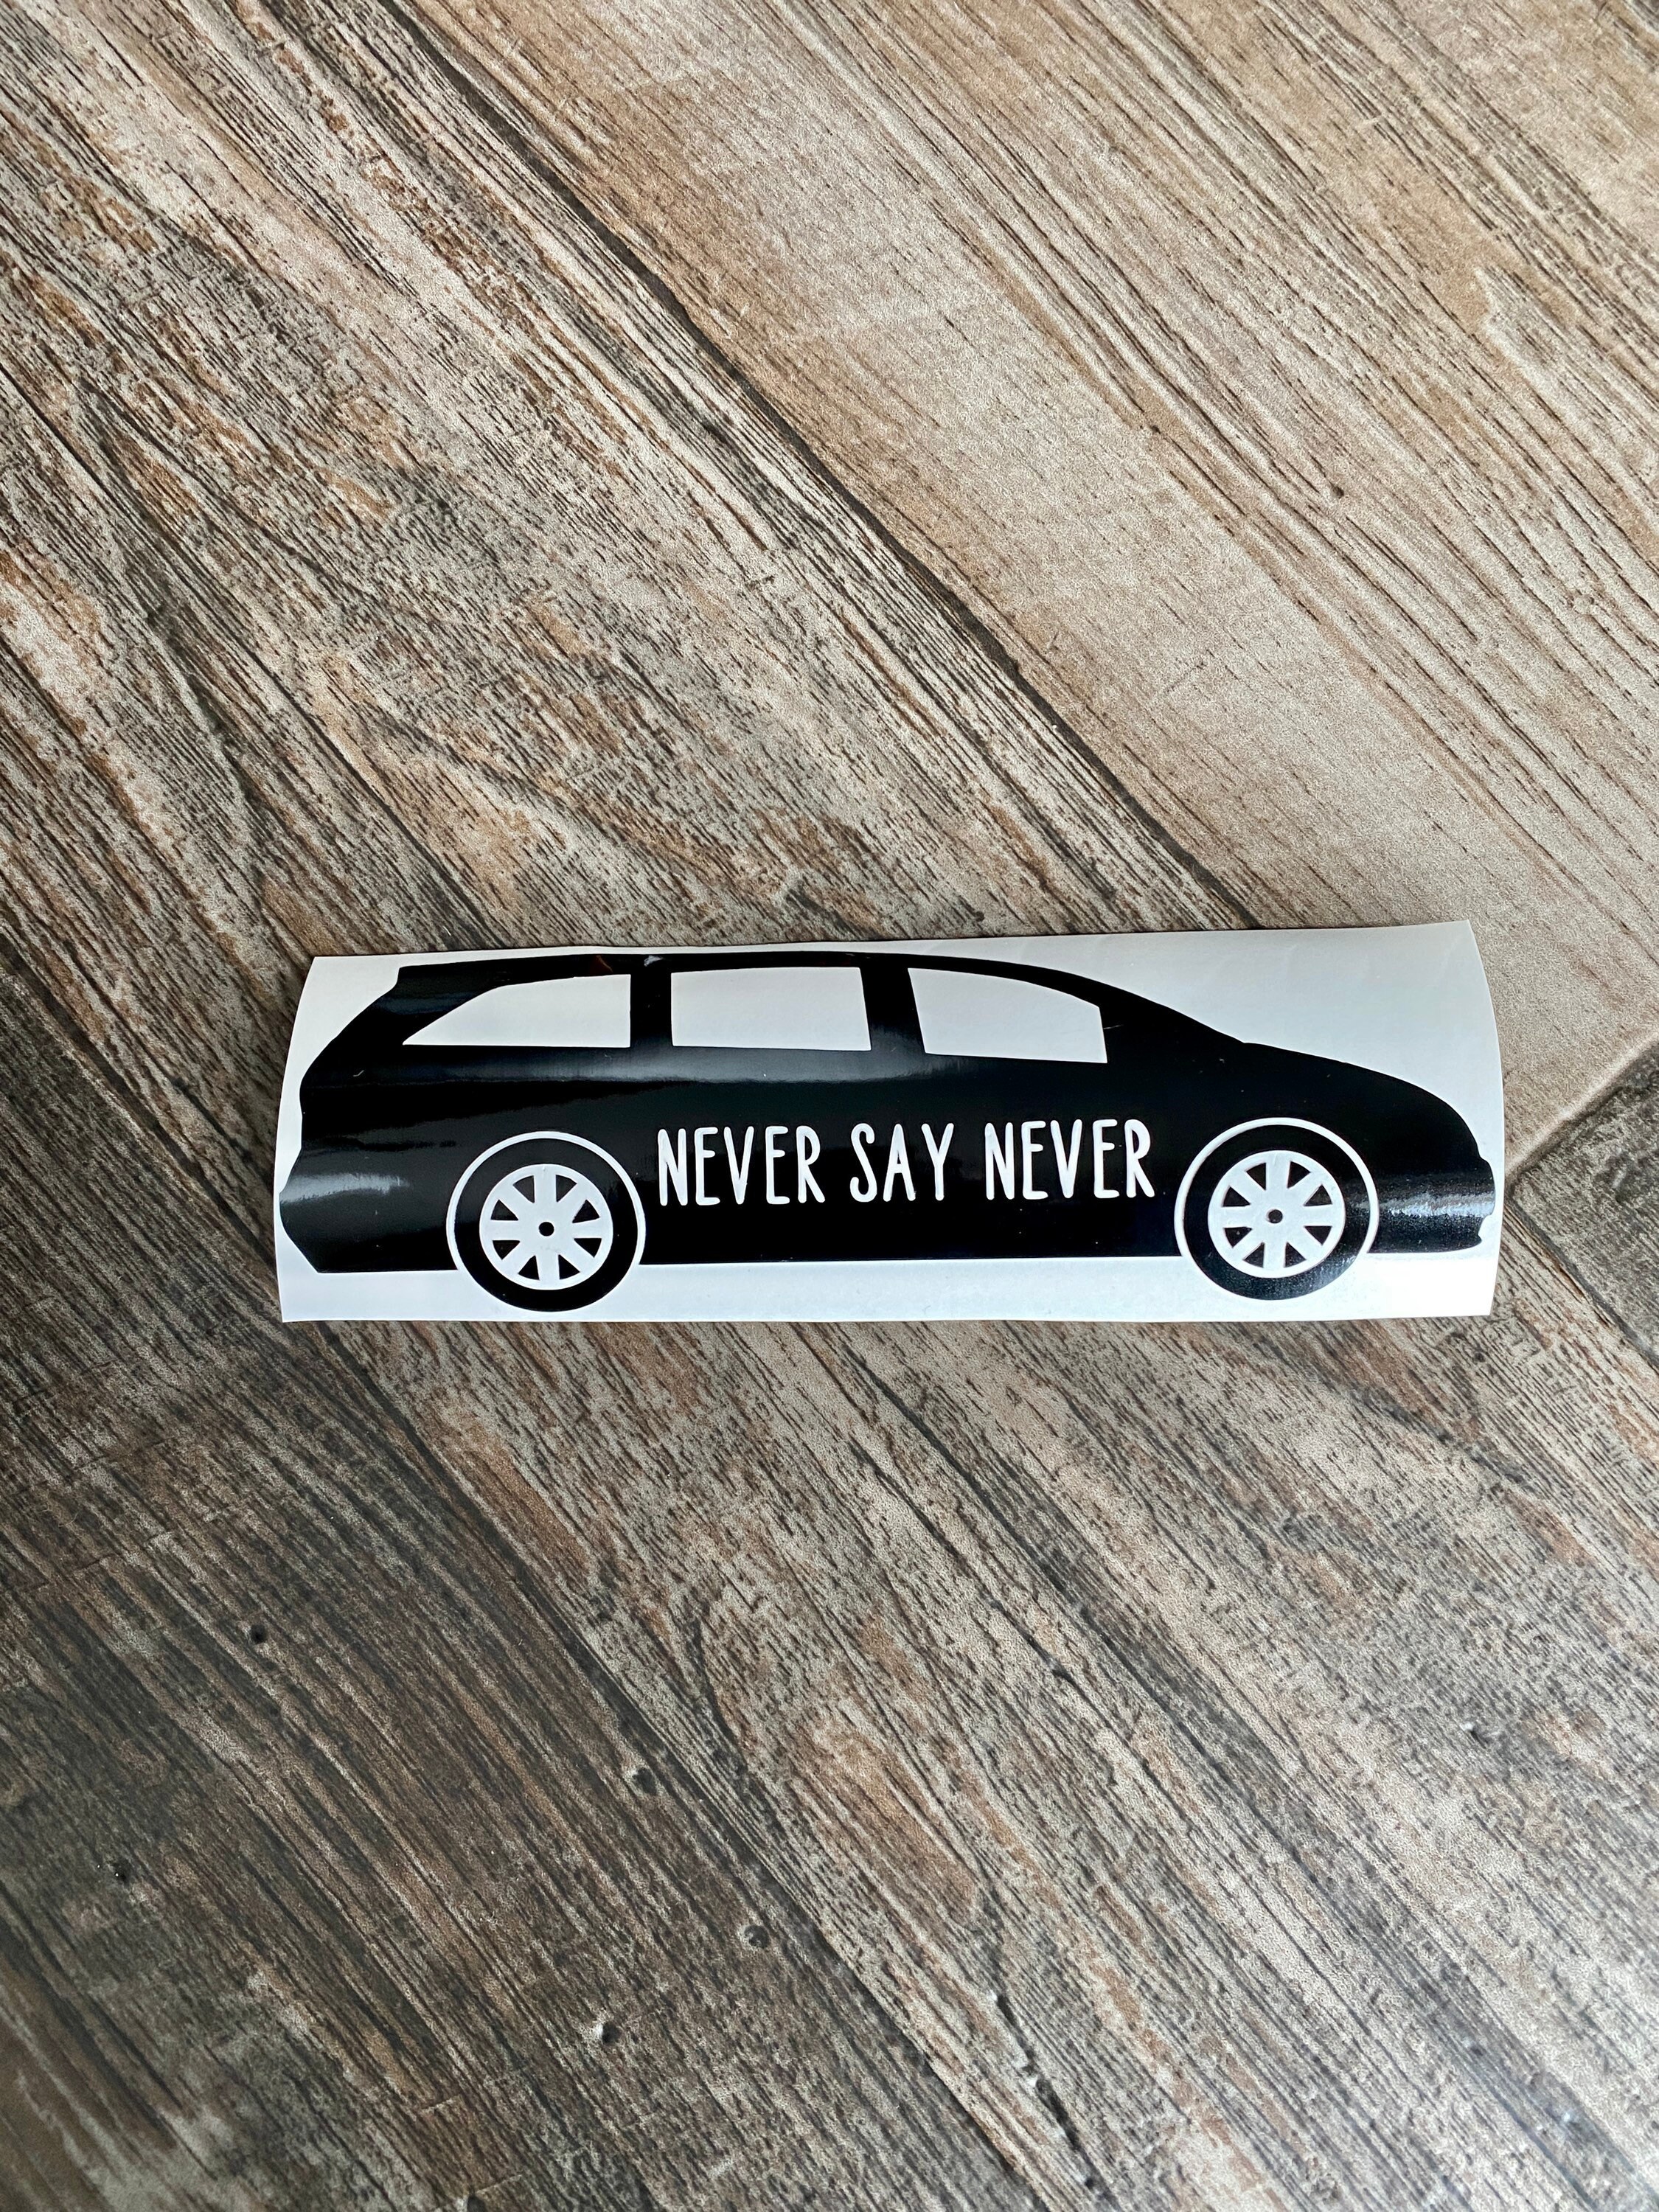 We all do things we said we never would sticker mom life,stocking stuffer gifts under 10,gifts for her Car Decal,bumper sticker Minivan